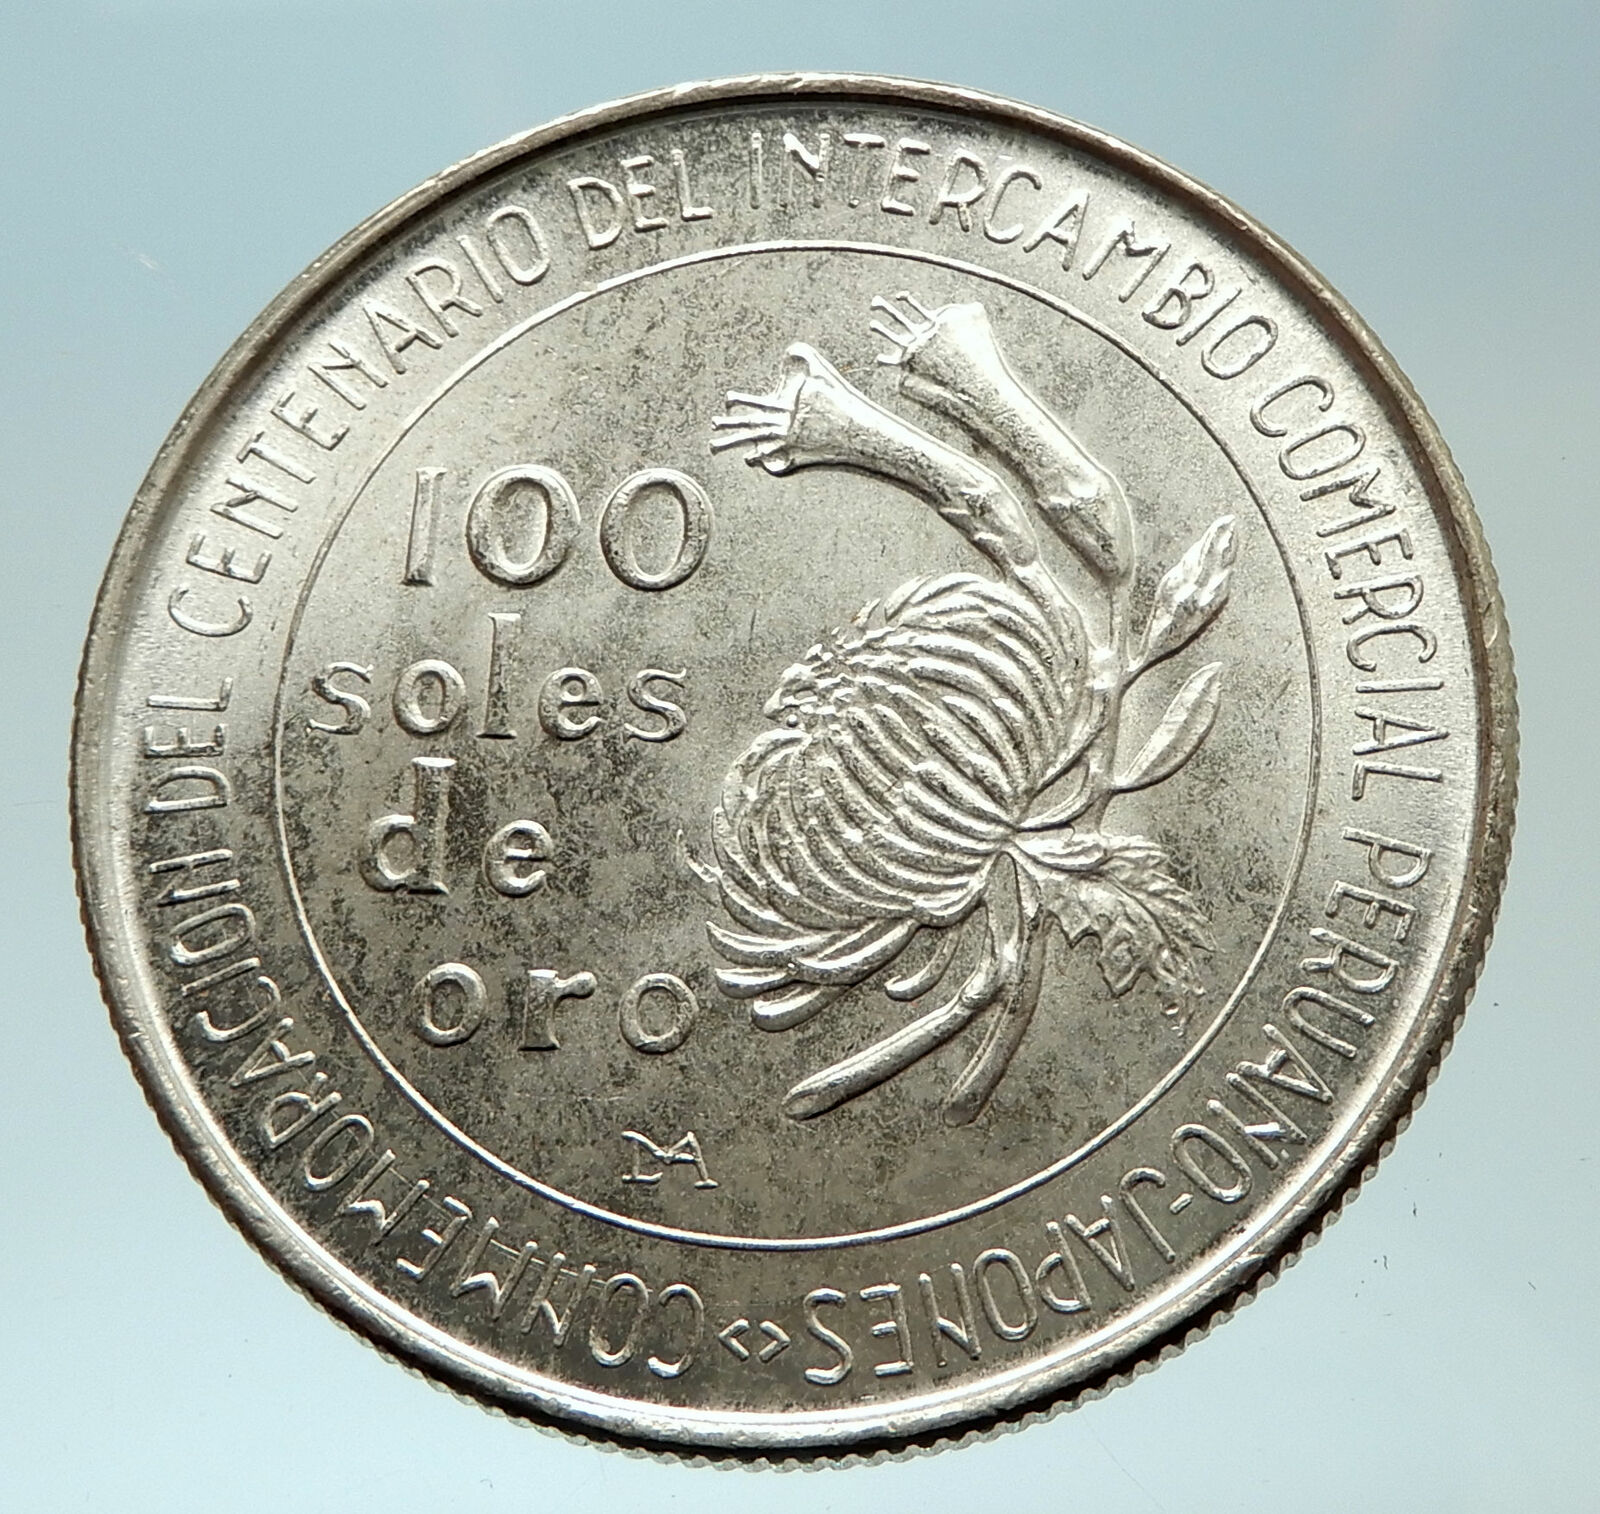 1973 PERU South America Japanese Relations Genuine 100 Soles Silver Coin i76633